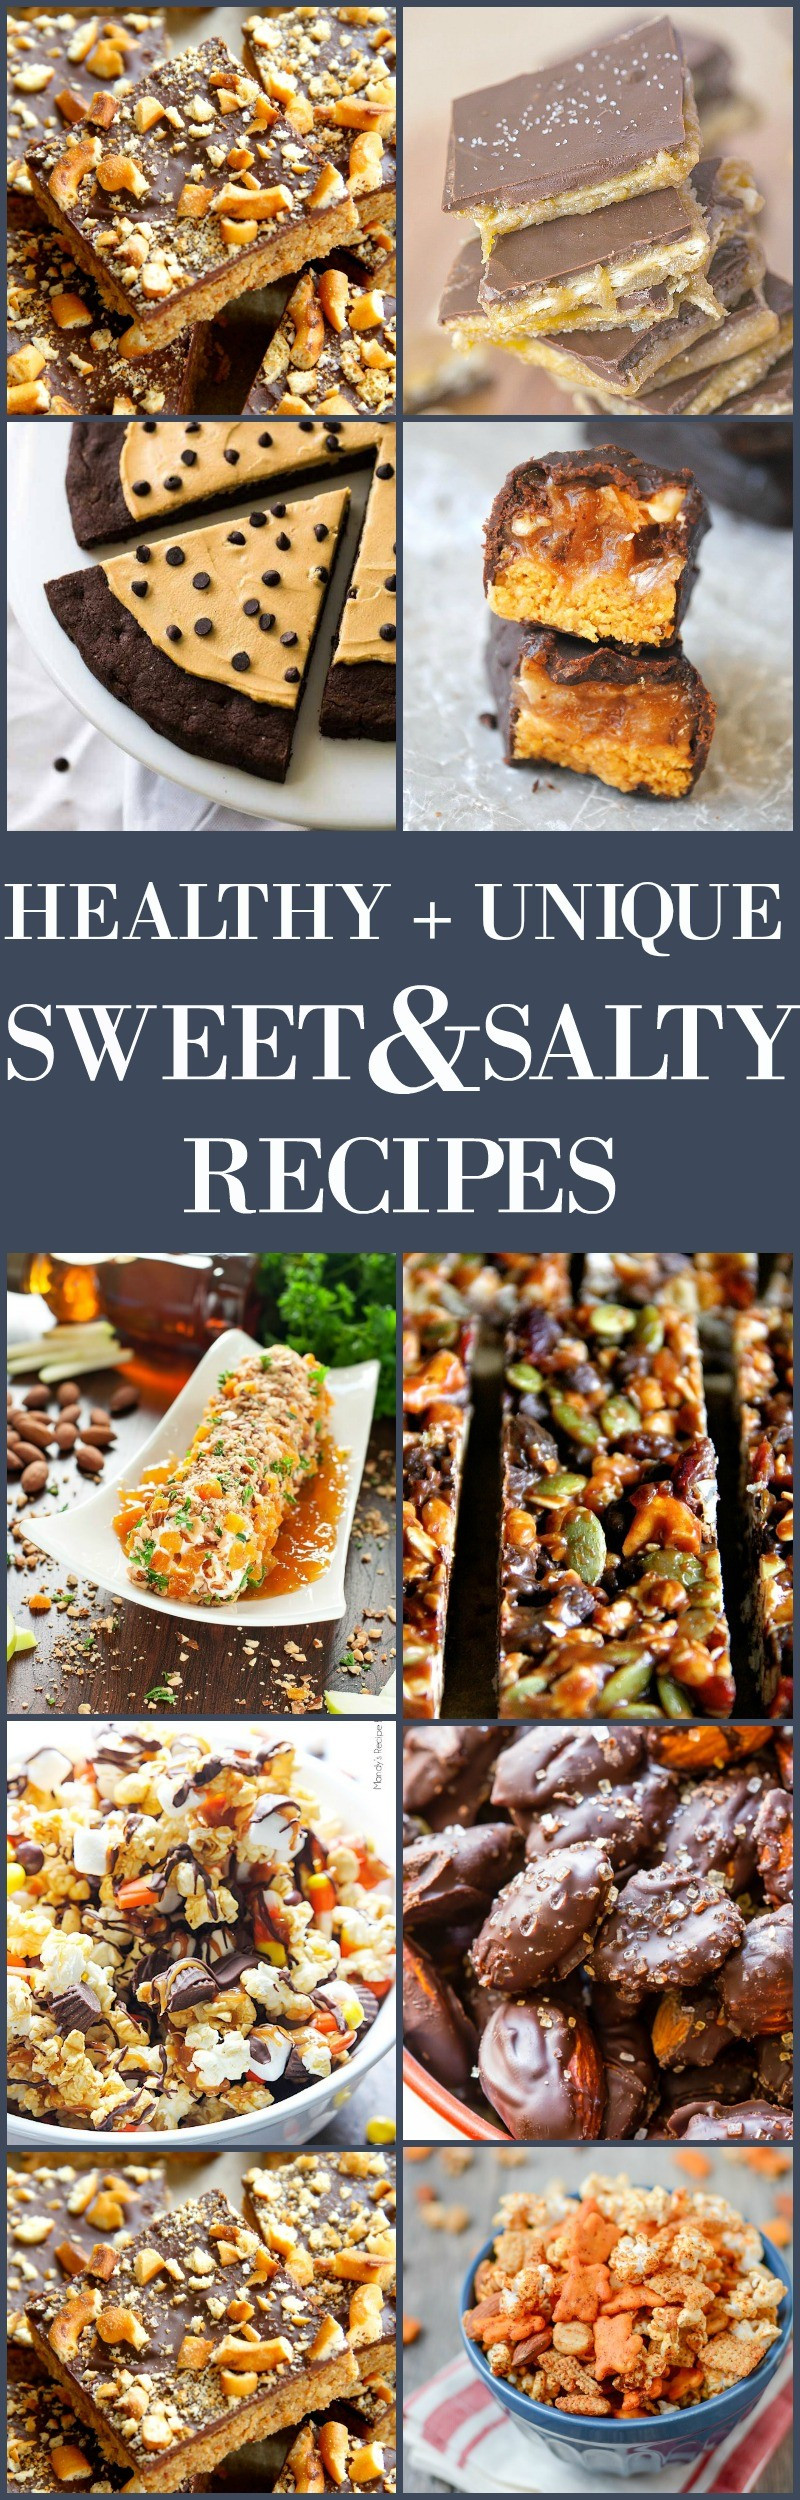 Sweet And Salty Healthy Snacks
 15 Healthy Sweet and Salty Snacks and Recipes